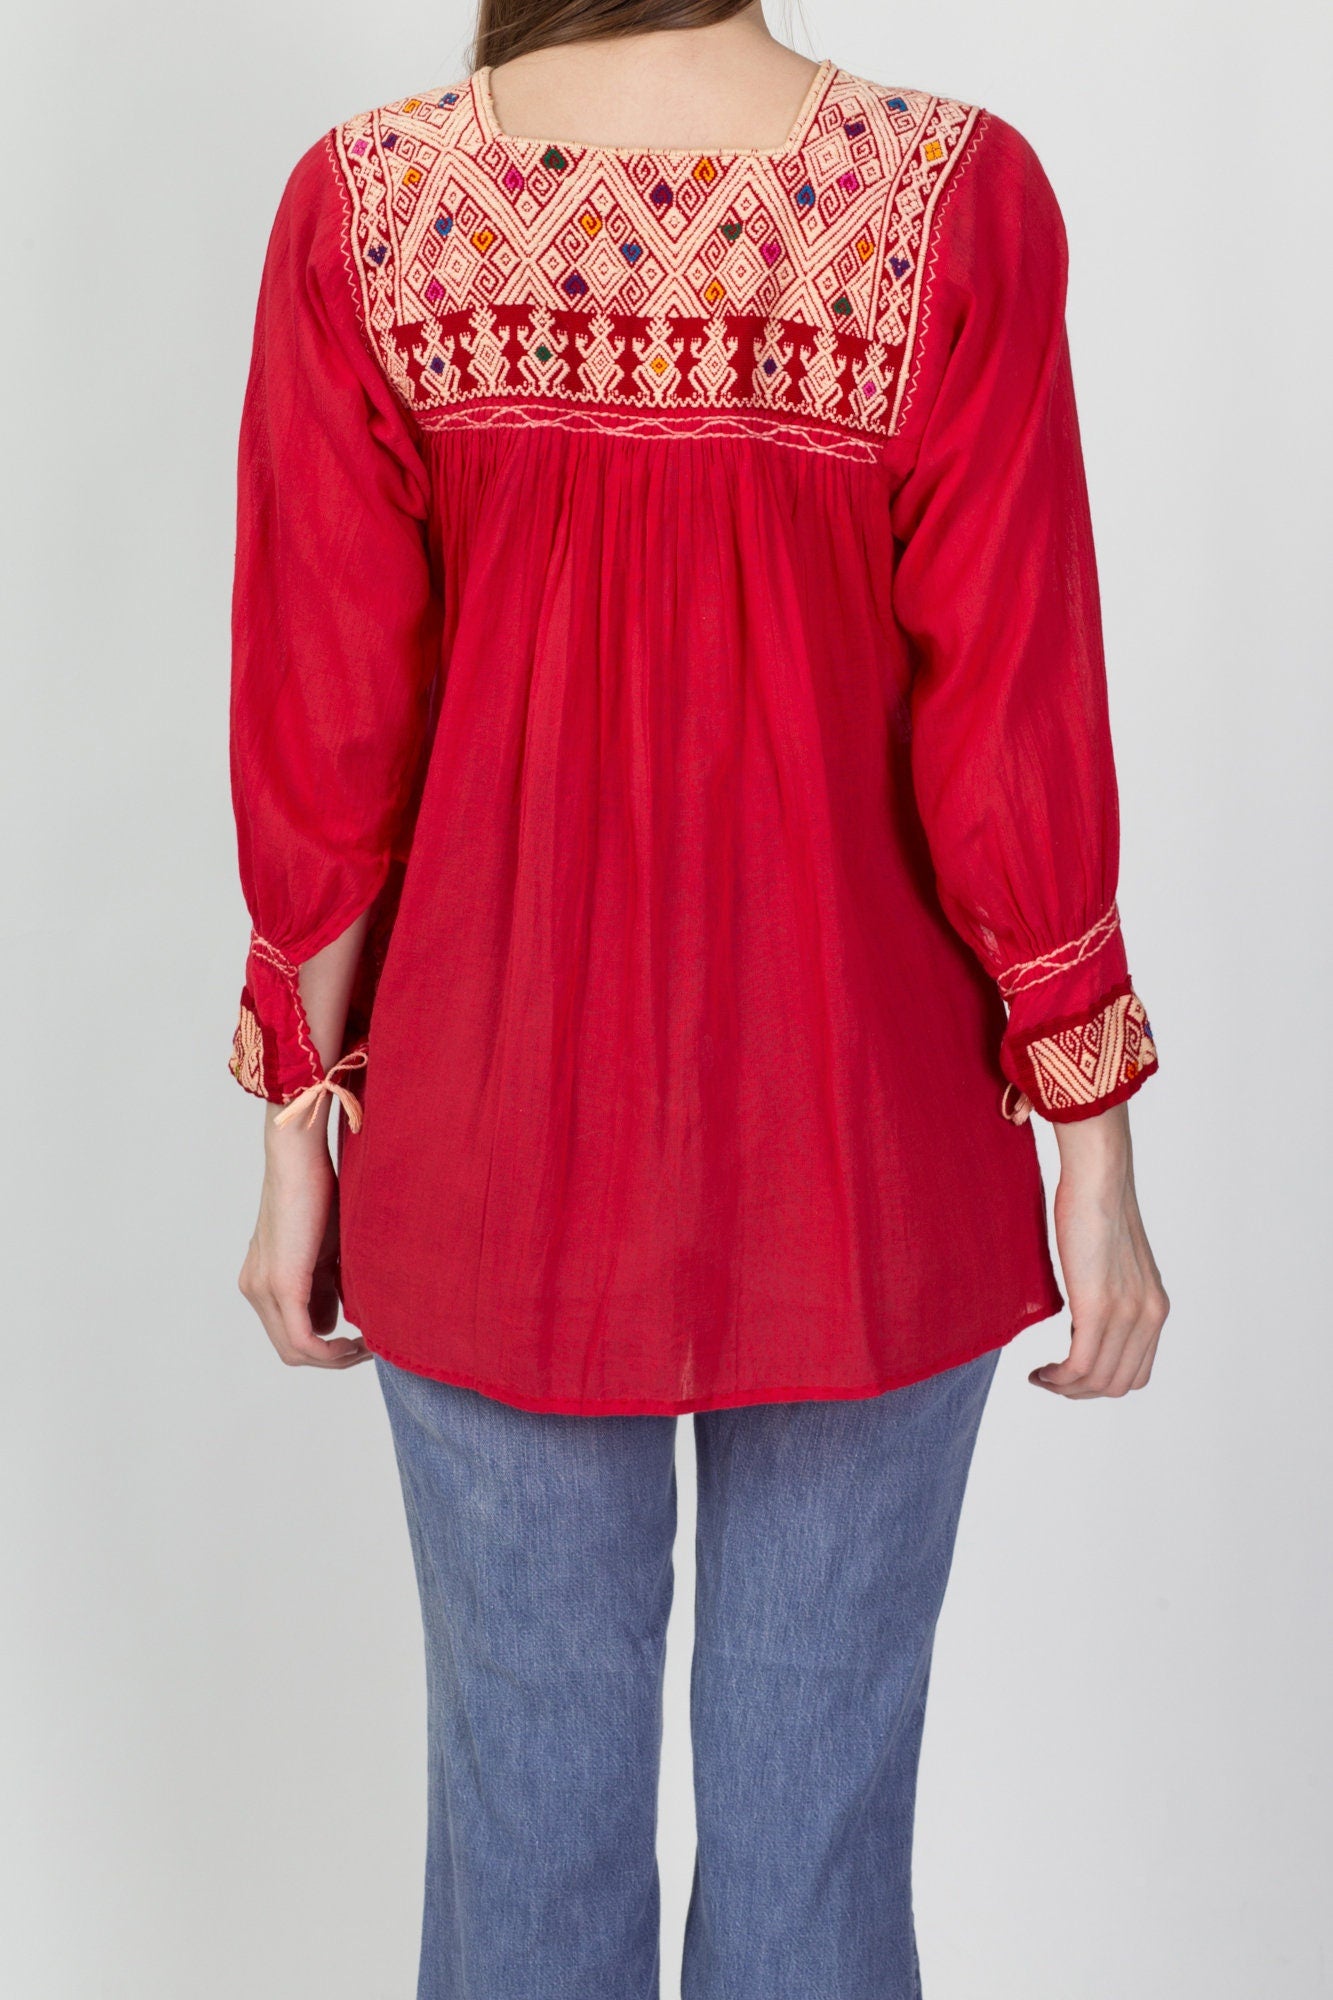 70s Embroidered Balkan Folk Blouse - Small to Medium 